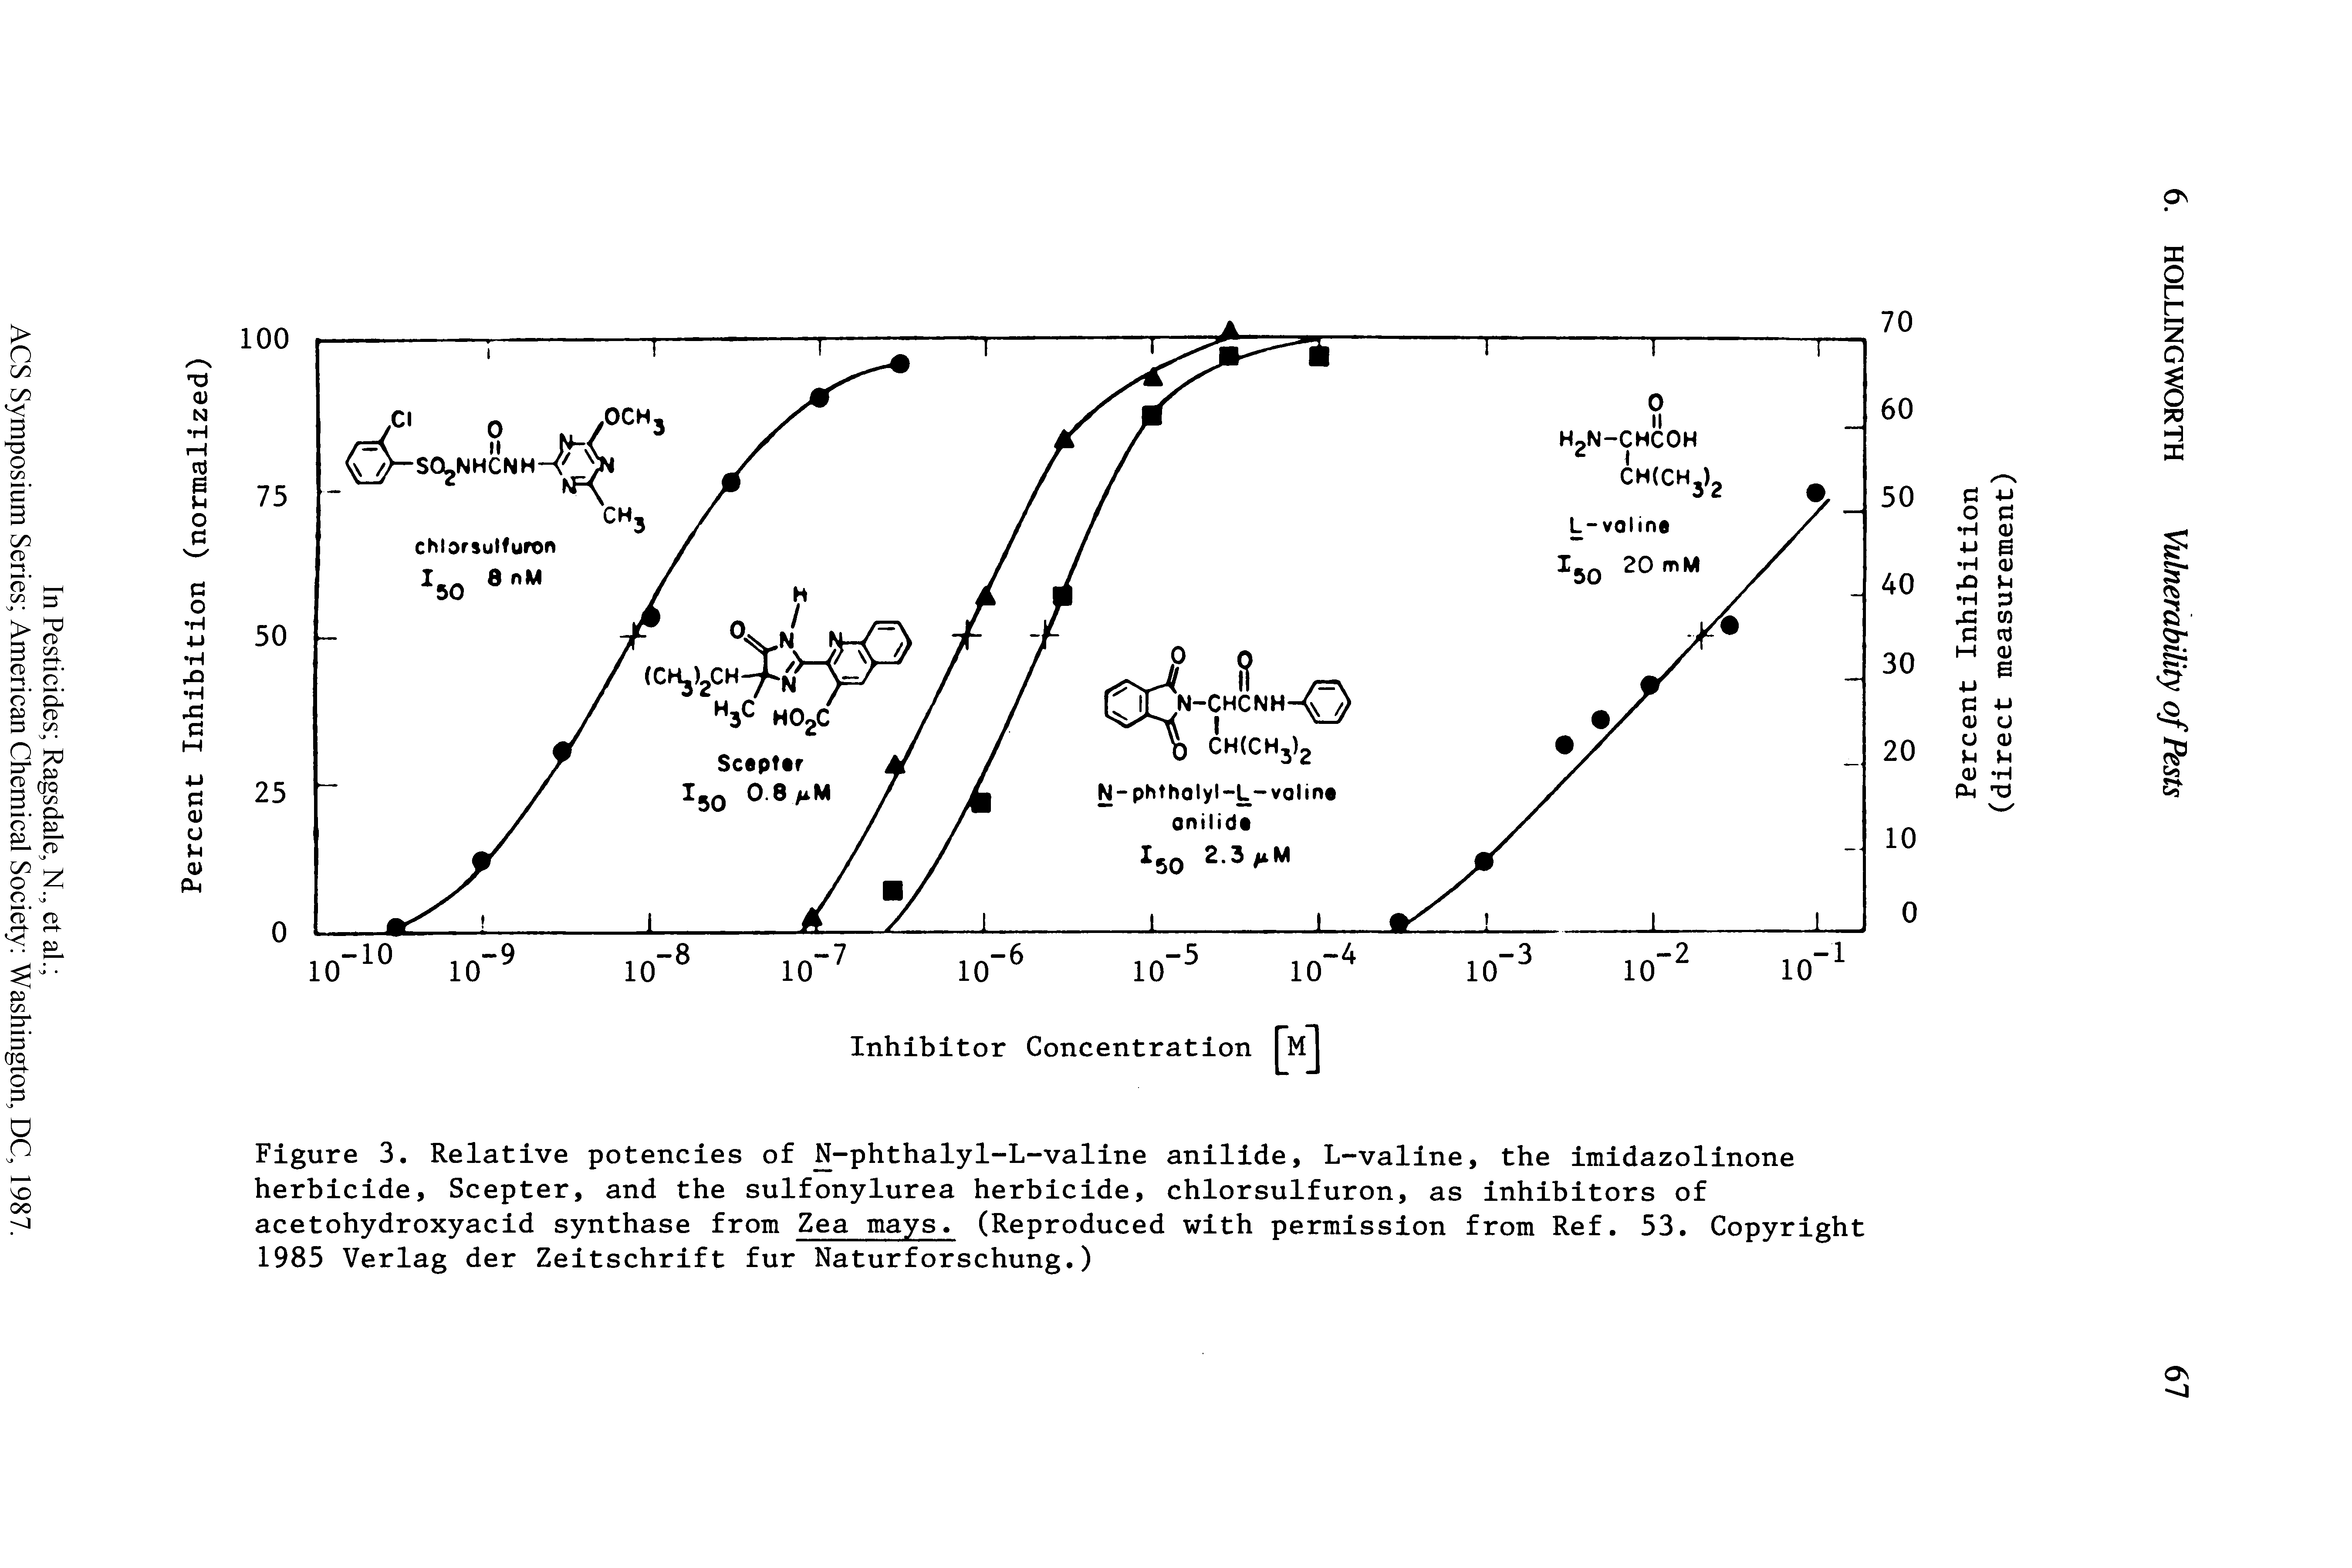 Figure 3. Relative potencies of N-phthalyl-L-valine anilide, L-valine, the imidazolinone herbicide, Scepter, and the sulfonylurea herbicide, chlorsulfuron, as inhibitors of acetohydroxyacid synthase from Zea mays. (Reproduced with permission from Ref. 53. Copyright 1985 Verlag der Zeitschrift fur Naturforschung.)...